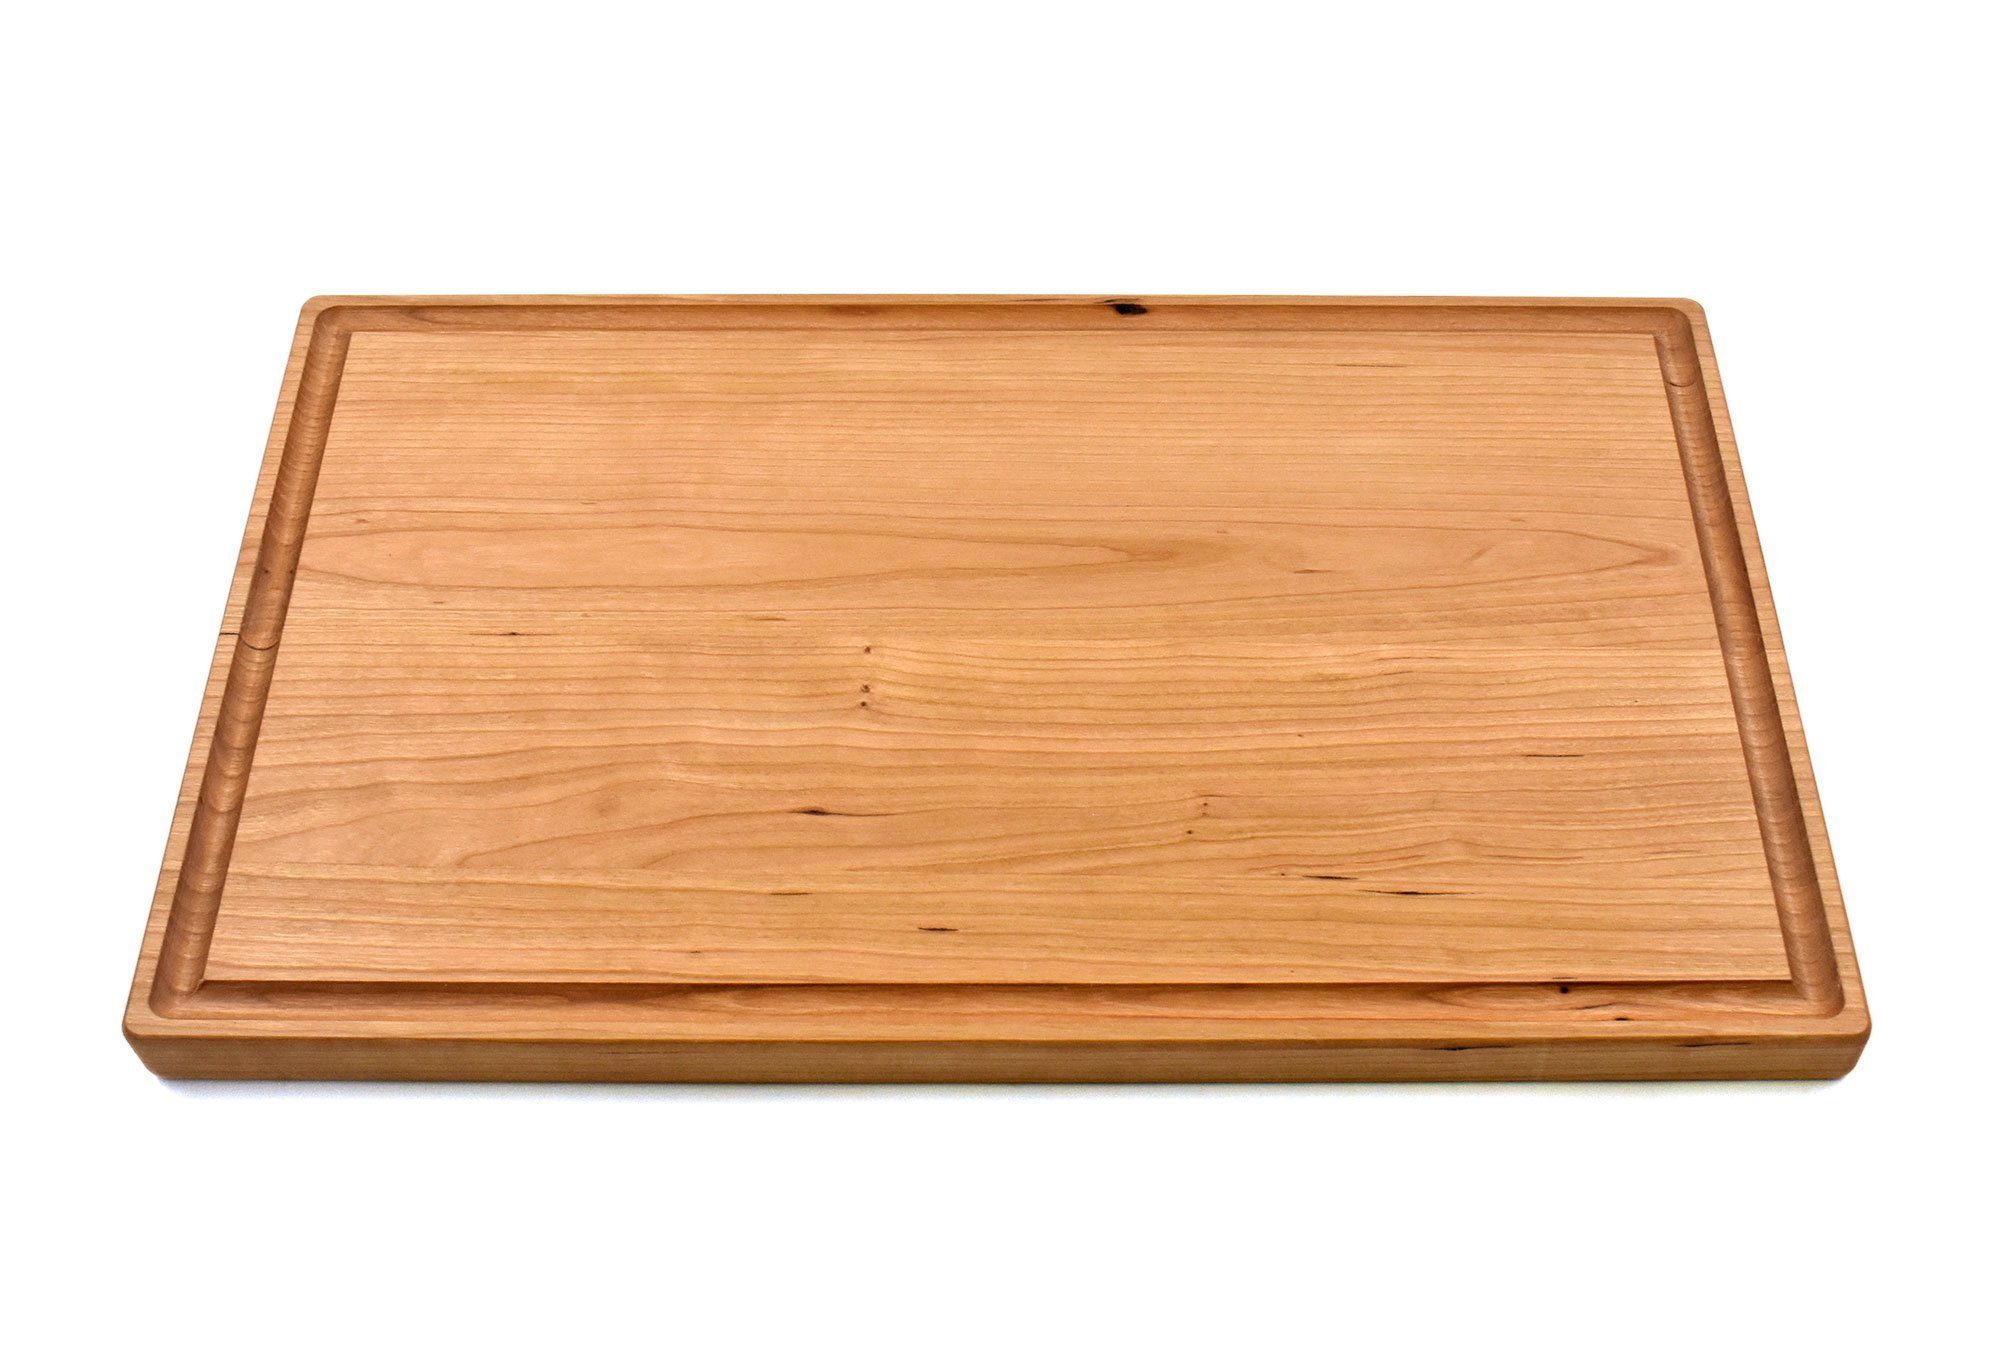 Large Cherry Cutting Board w/ Juice Groove 11 x 17 – Hailey Home